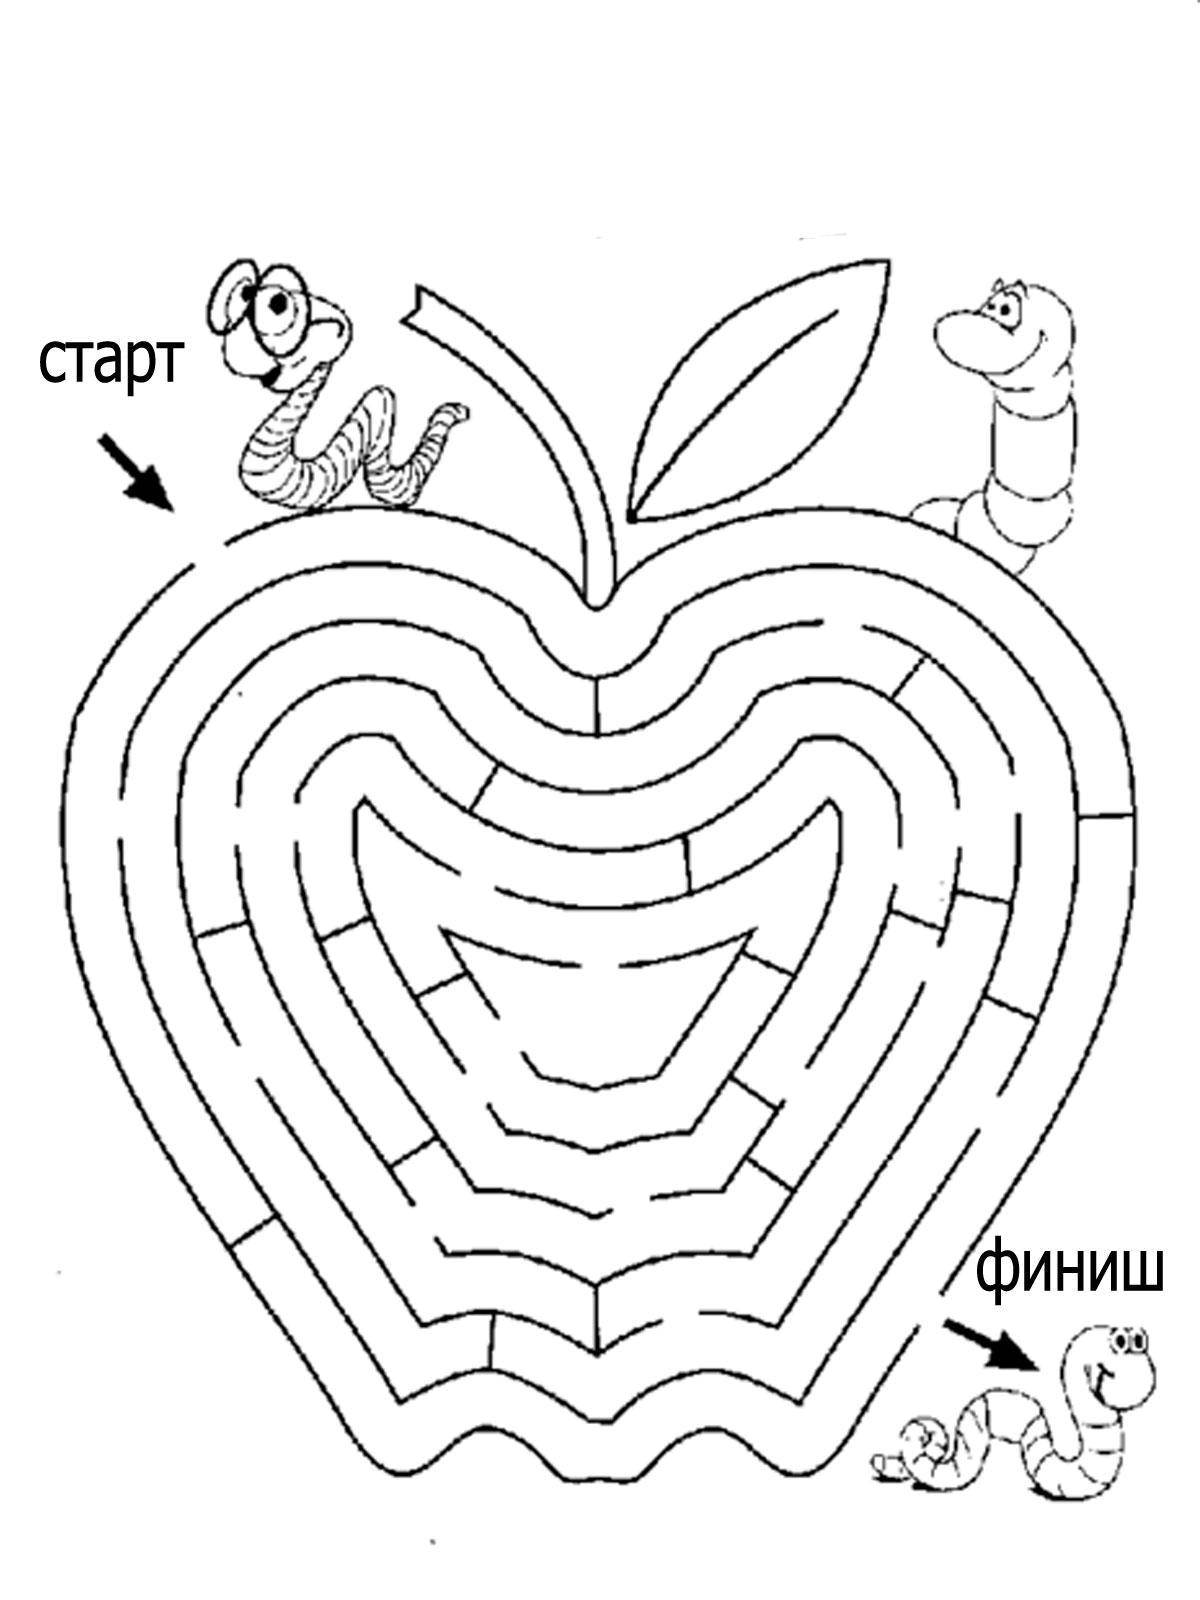 Coloring Maze Apple. Category the labyrinth. Tags:  maze, Apple.